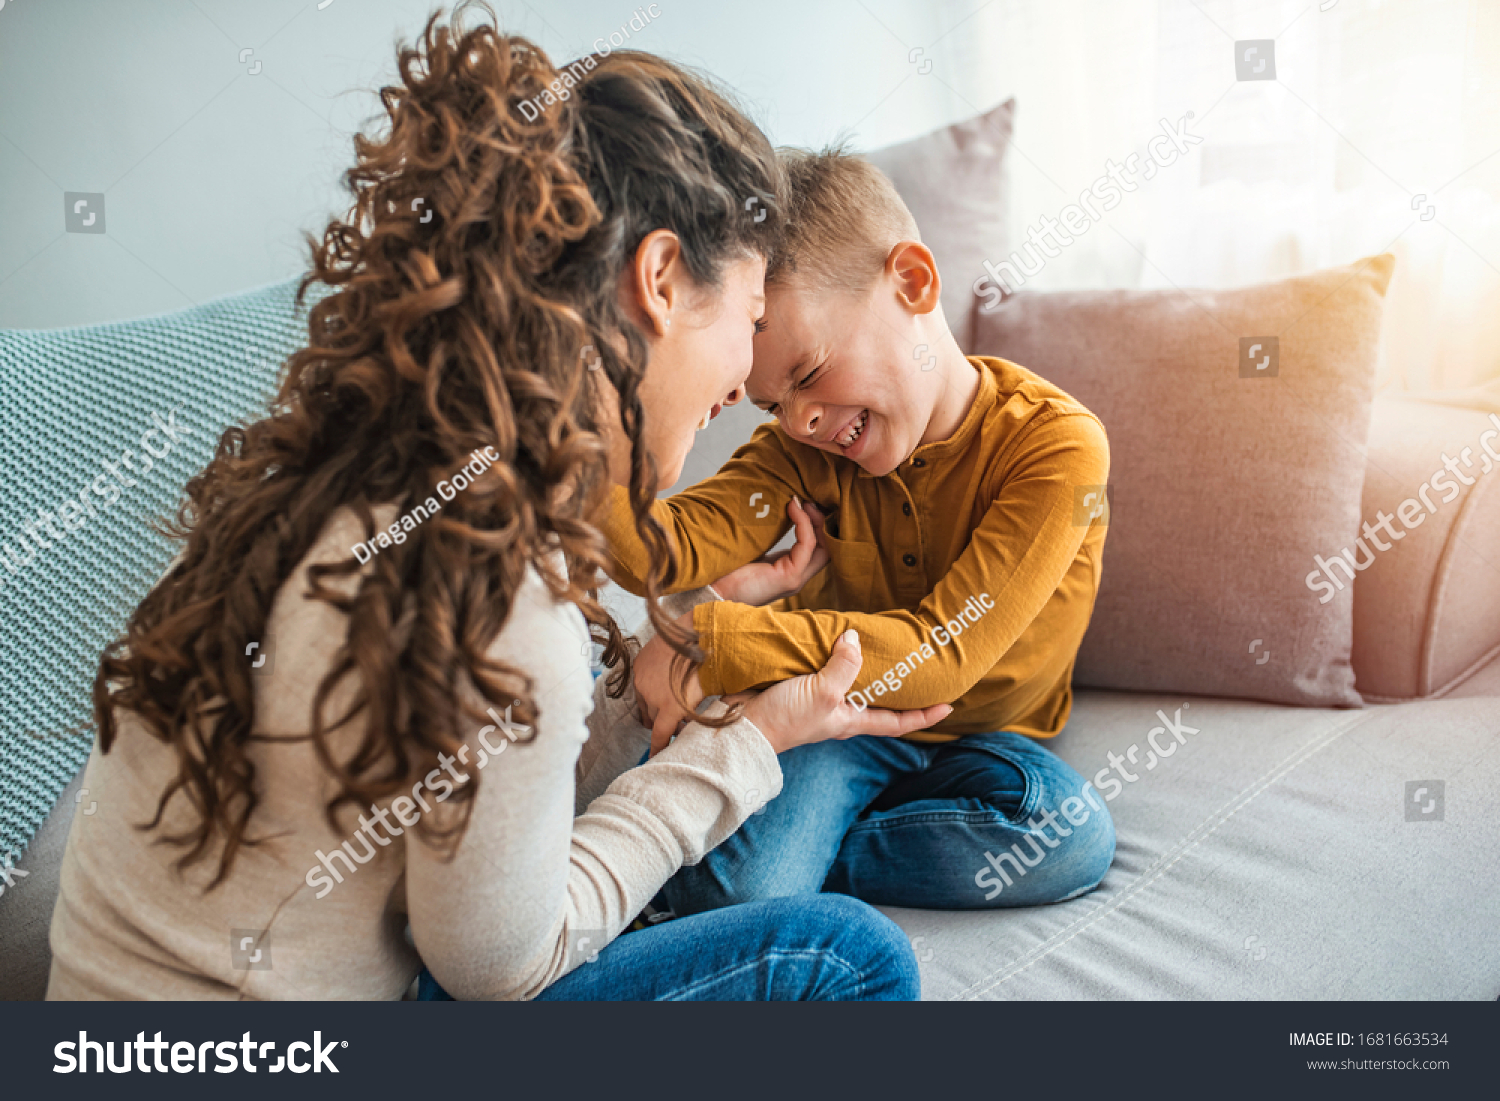 The kind of love that can't be described, only felt. Mother and her child, tickling, kidding and having fun in the couch, with spontaneous smiles. Loving my son  #1681663534